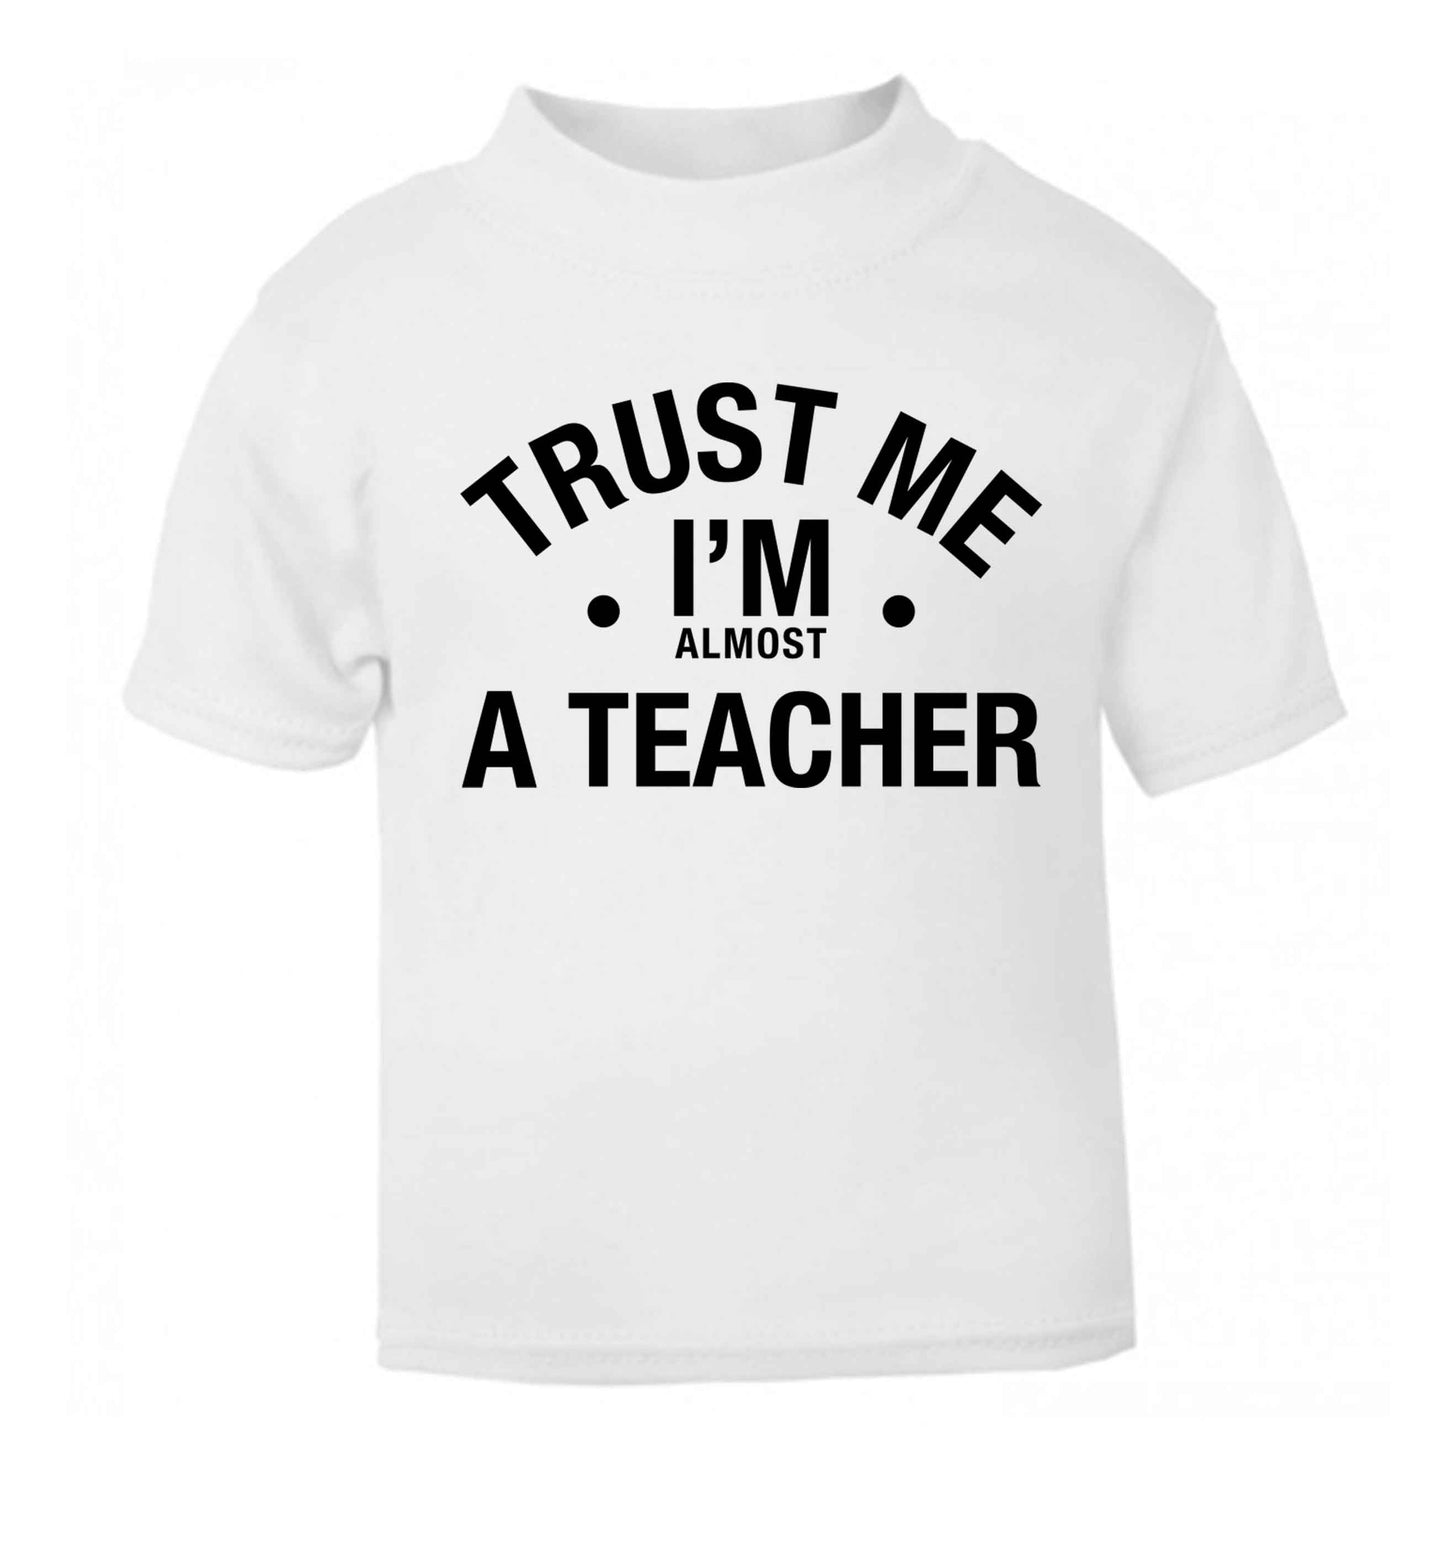 Trust me I'm almost a teacher white baby toddler Tshirt 2 Years